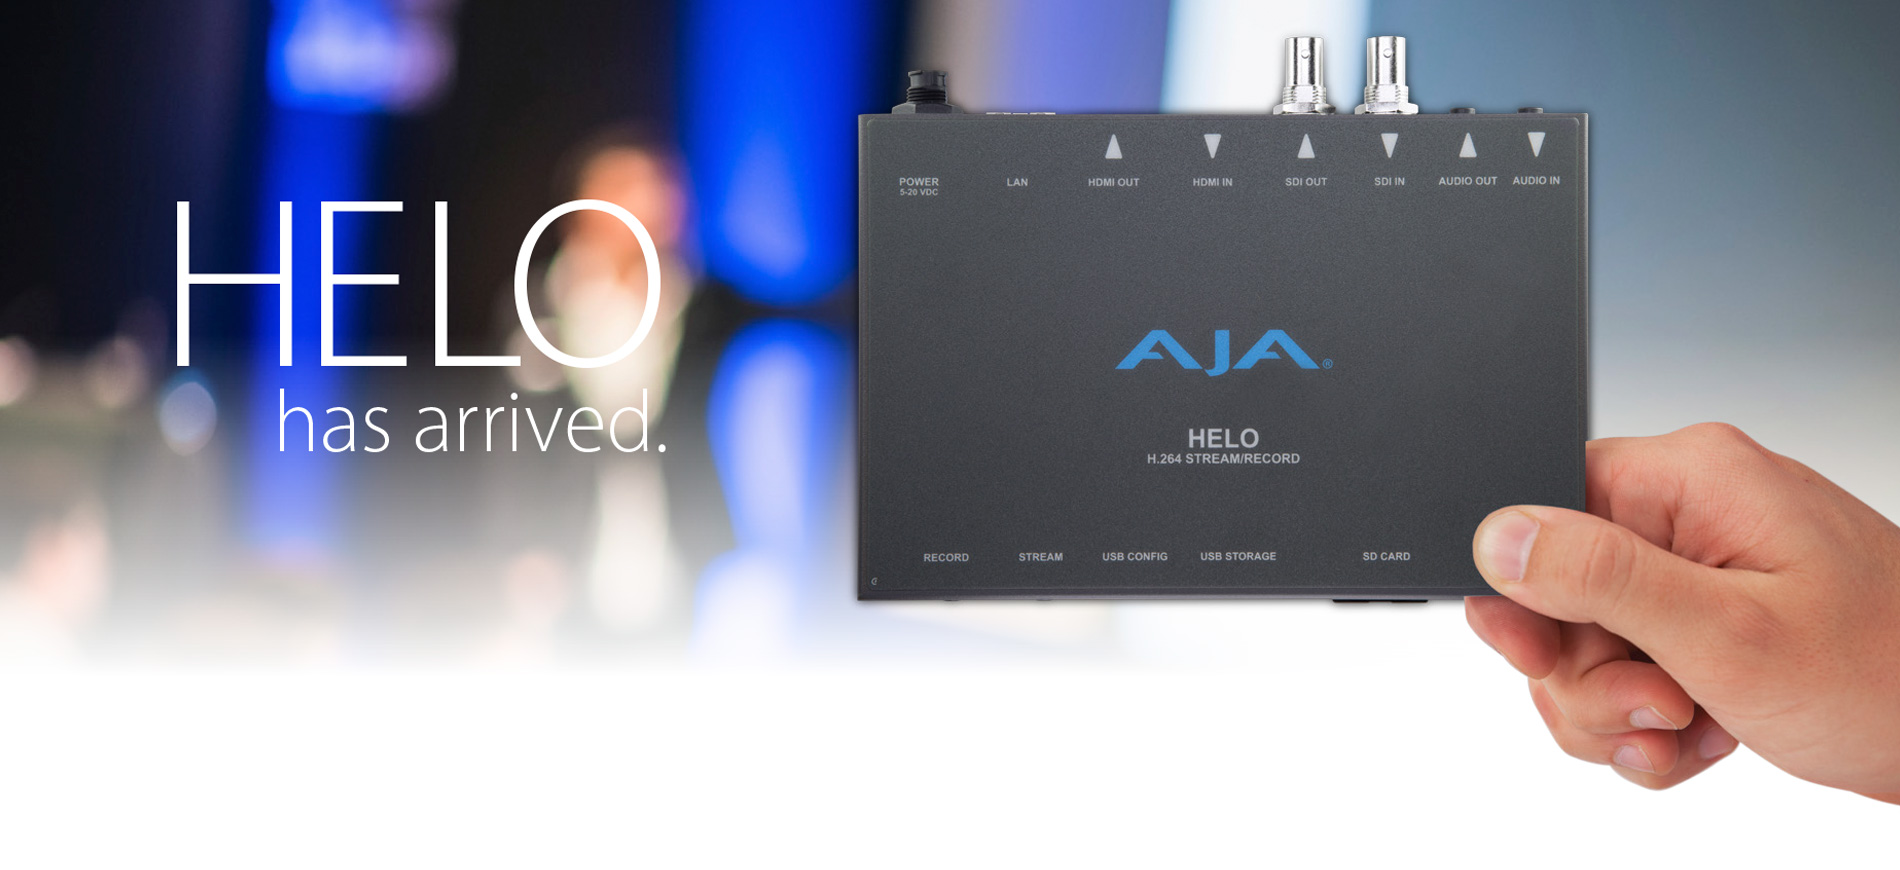 AJA Announces HELO Streaming and Recording Appliance with H.264 Support